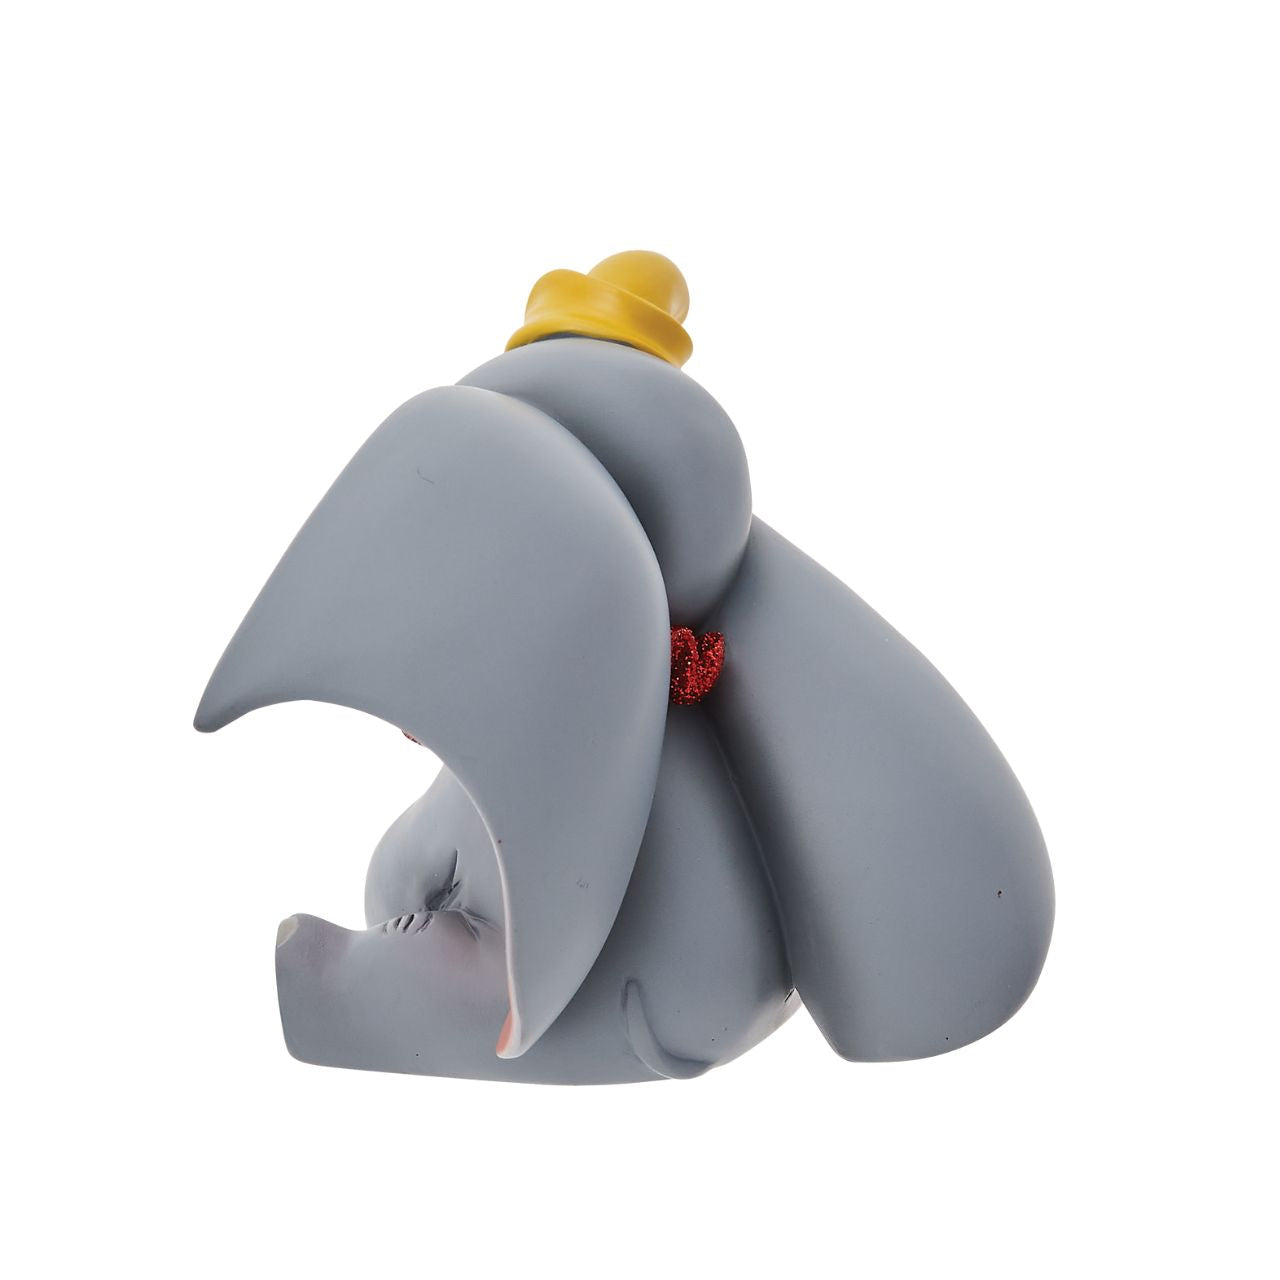 Everyone's favourite flying elephant looks circus-ready in this adorable pose by Disney Showcase. This realistic figurine has a beautiful finish complete with red glitter. This is a great addition to any nursery and is not a toy or children's product.